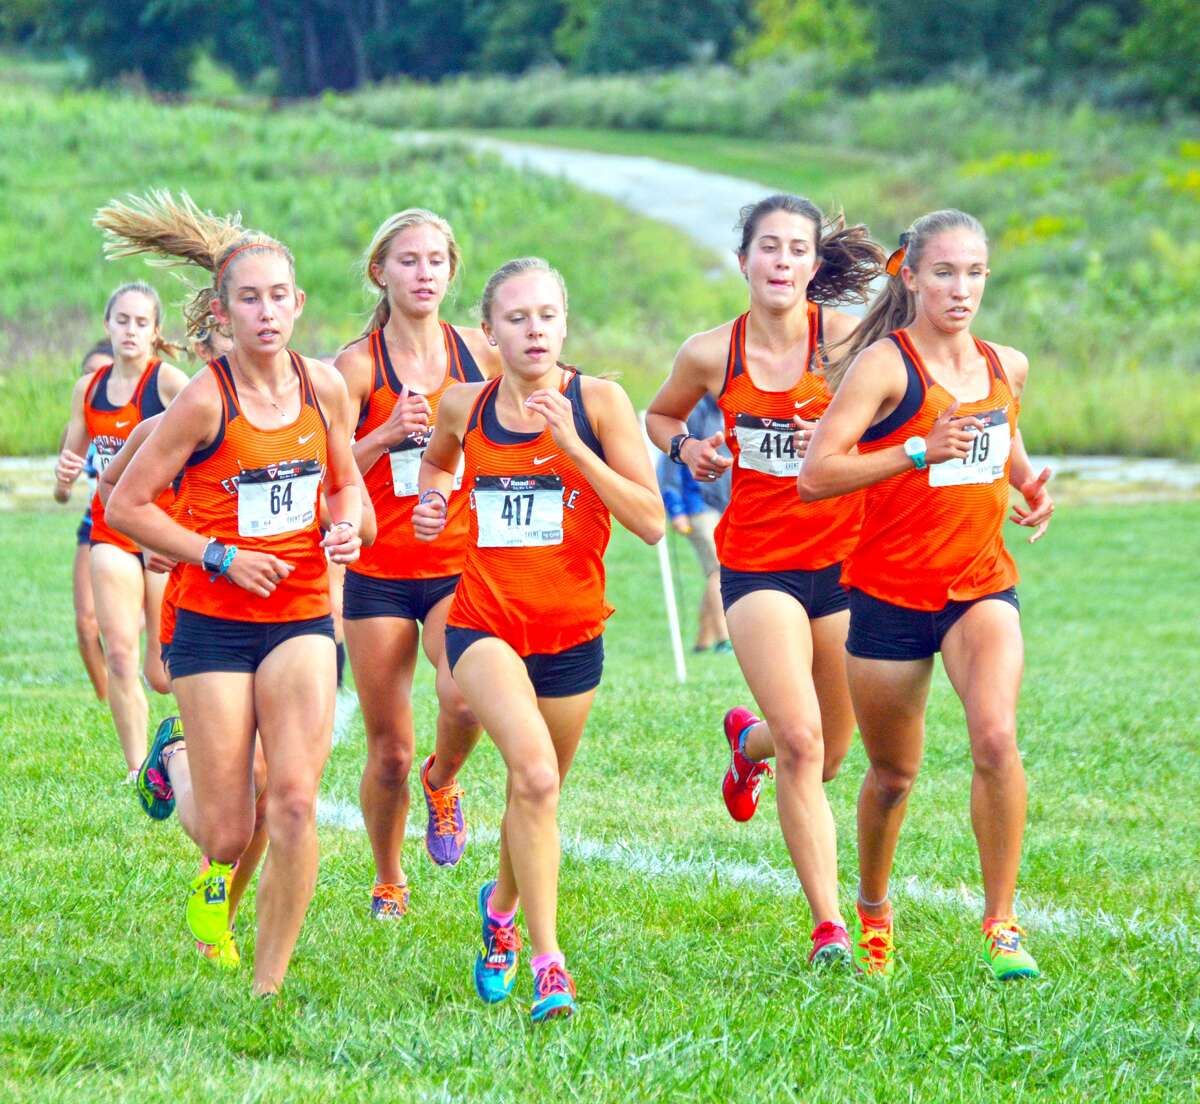 The Edwardsville girls cross country team runs in a pack during the Tiger Classic on Wednesday at the SIUE course.